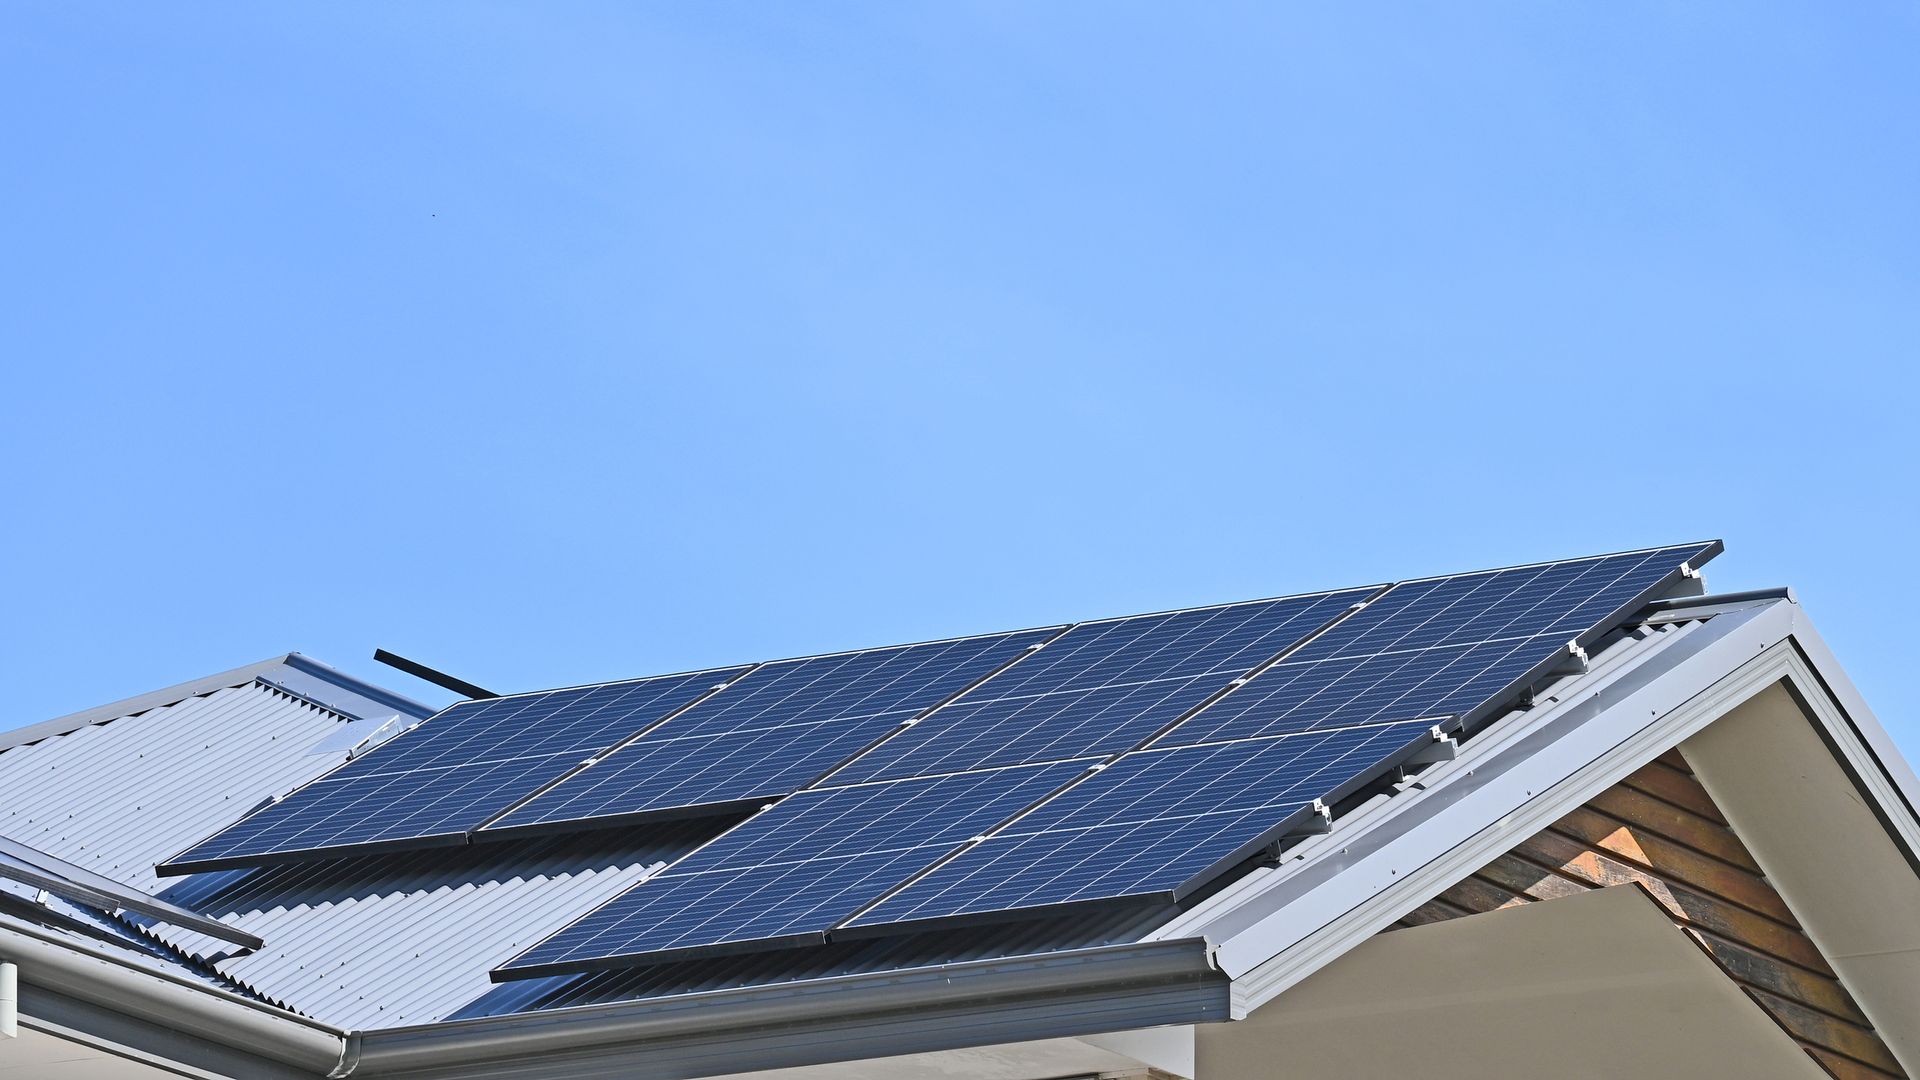 There are two solar panels on the roof of a house.